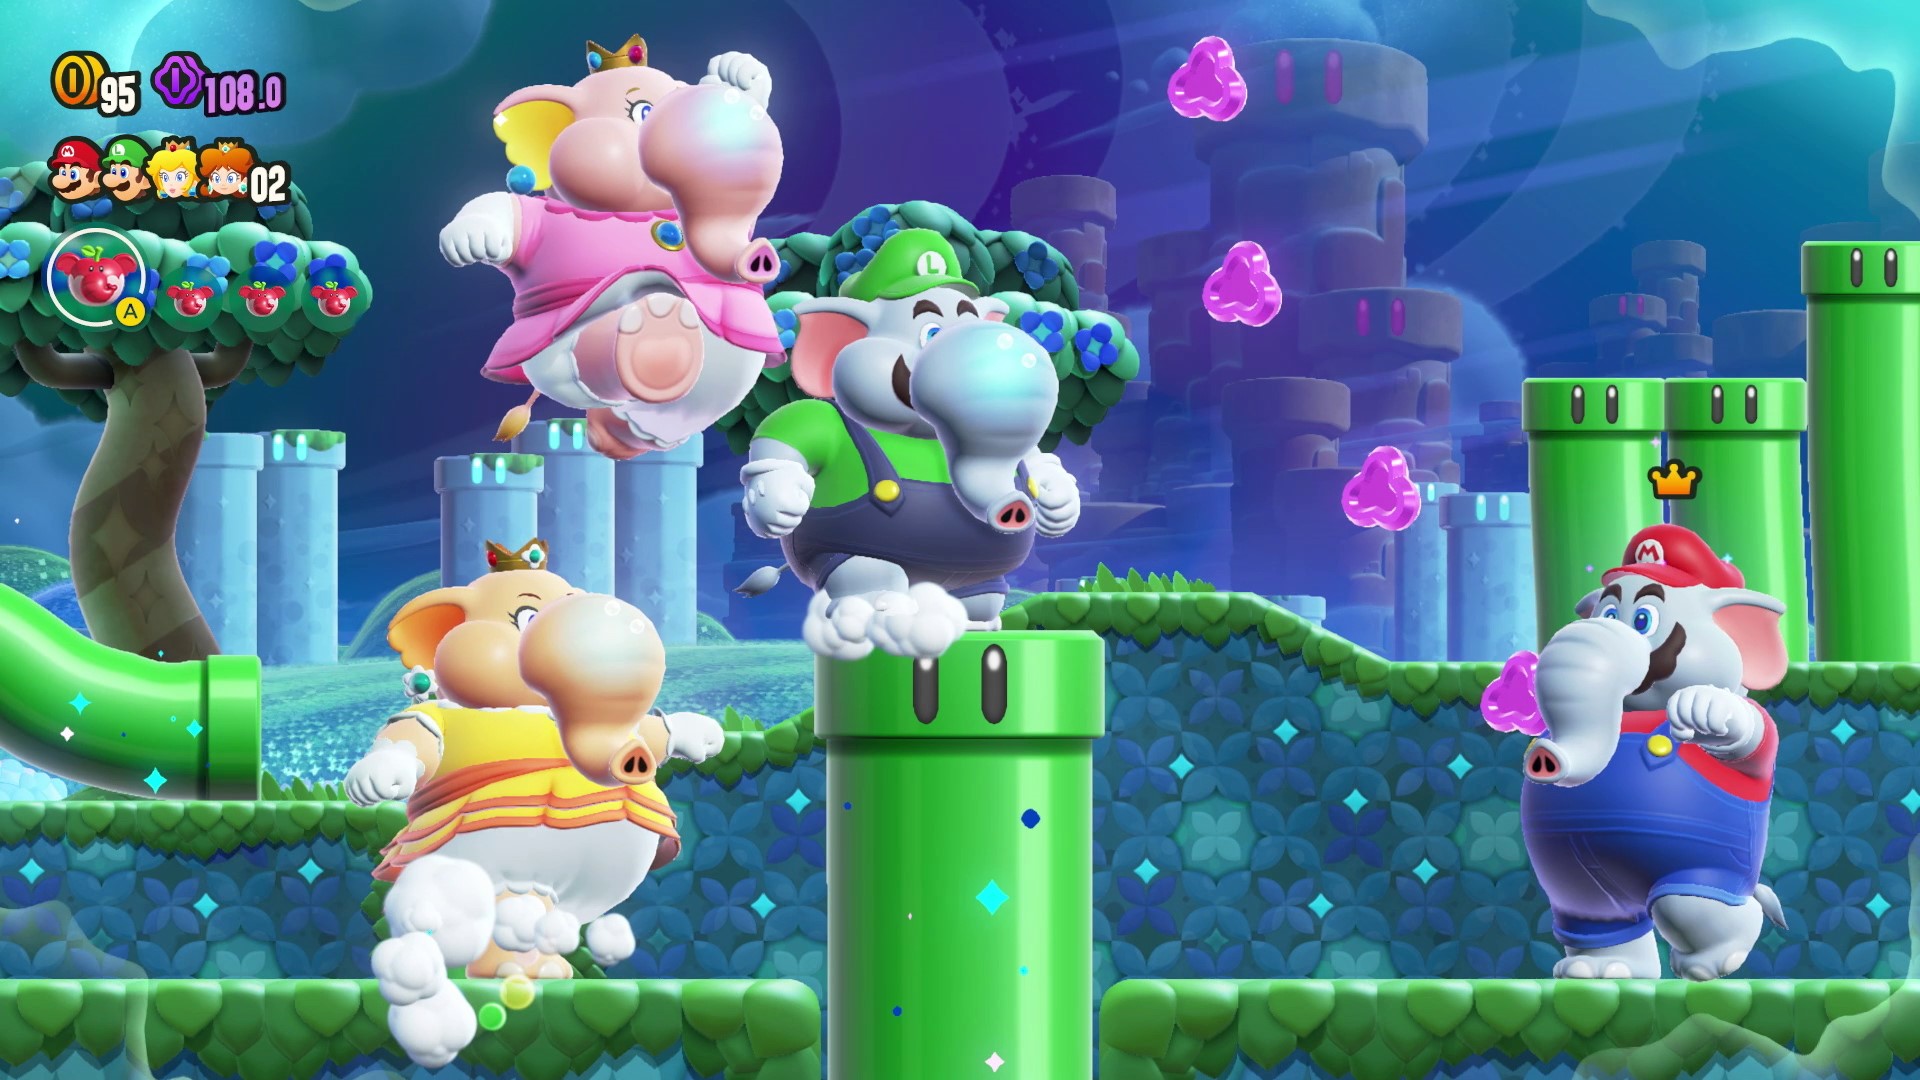 Lovingood Review: 'Super Mario Bros. Wonder' is a treat for the family and  returning fans